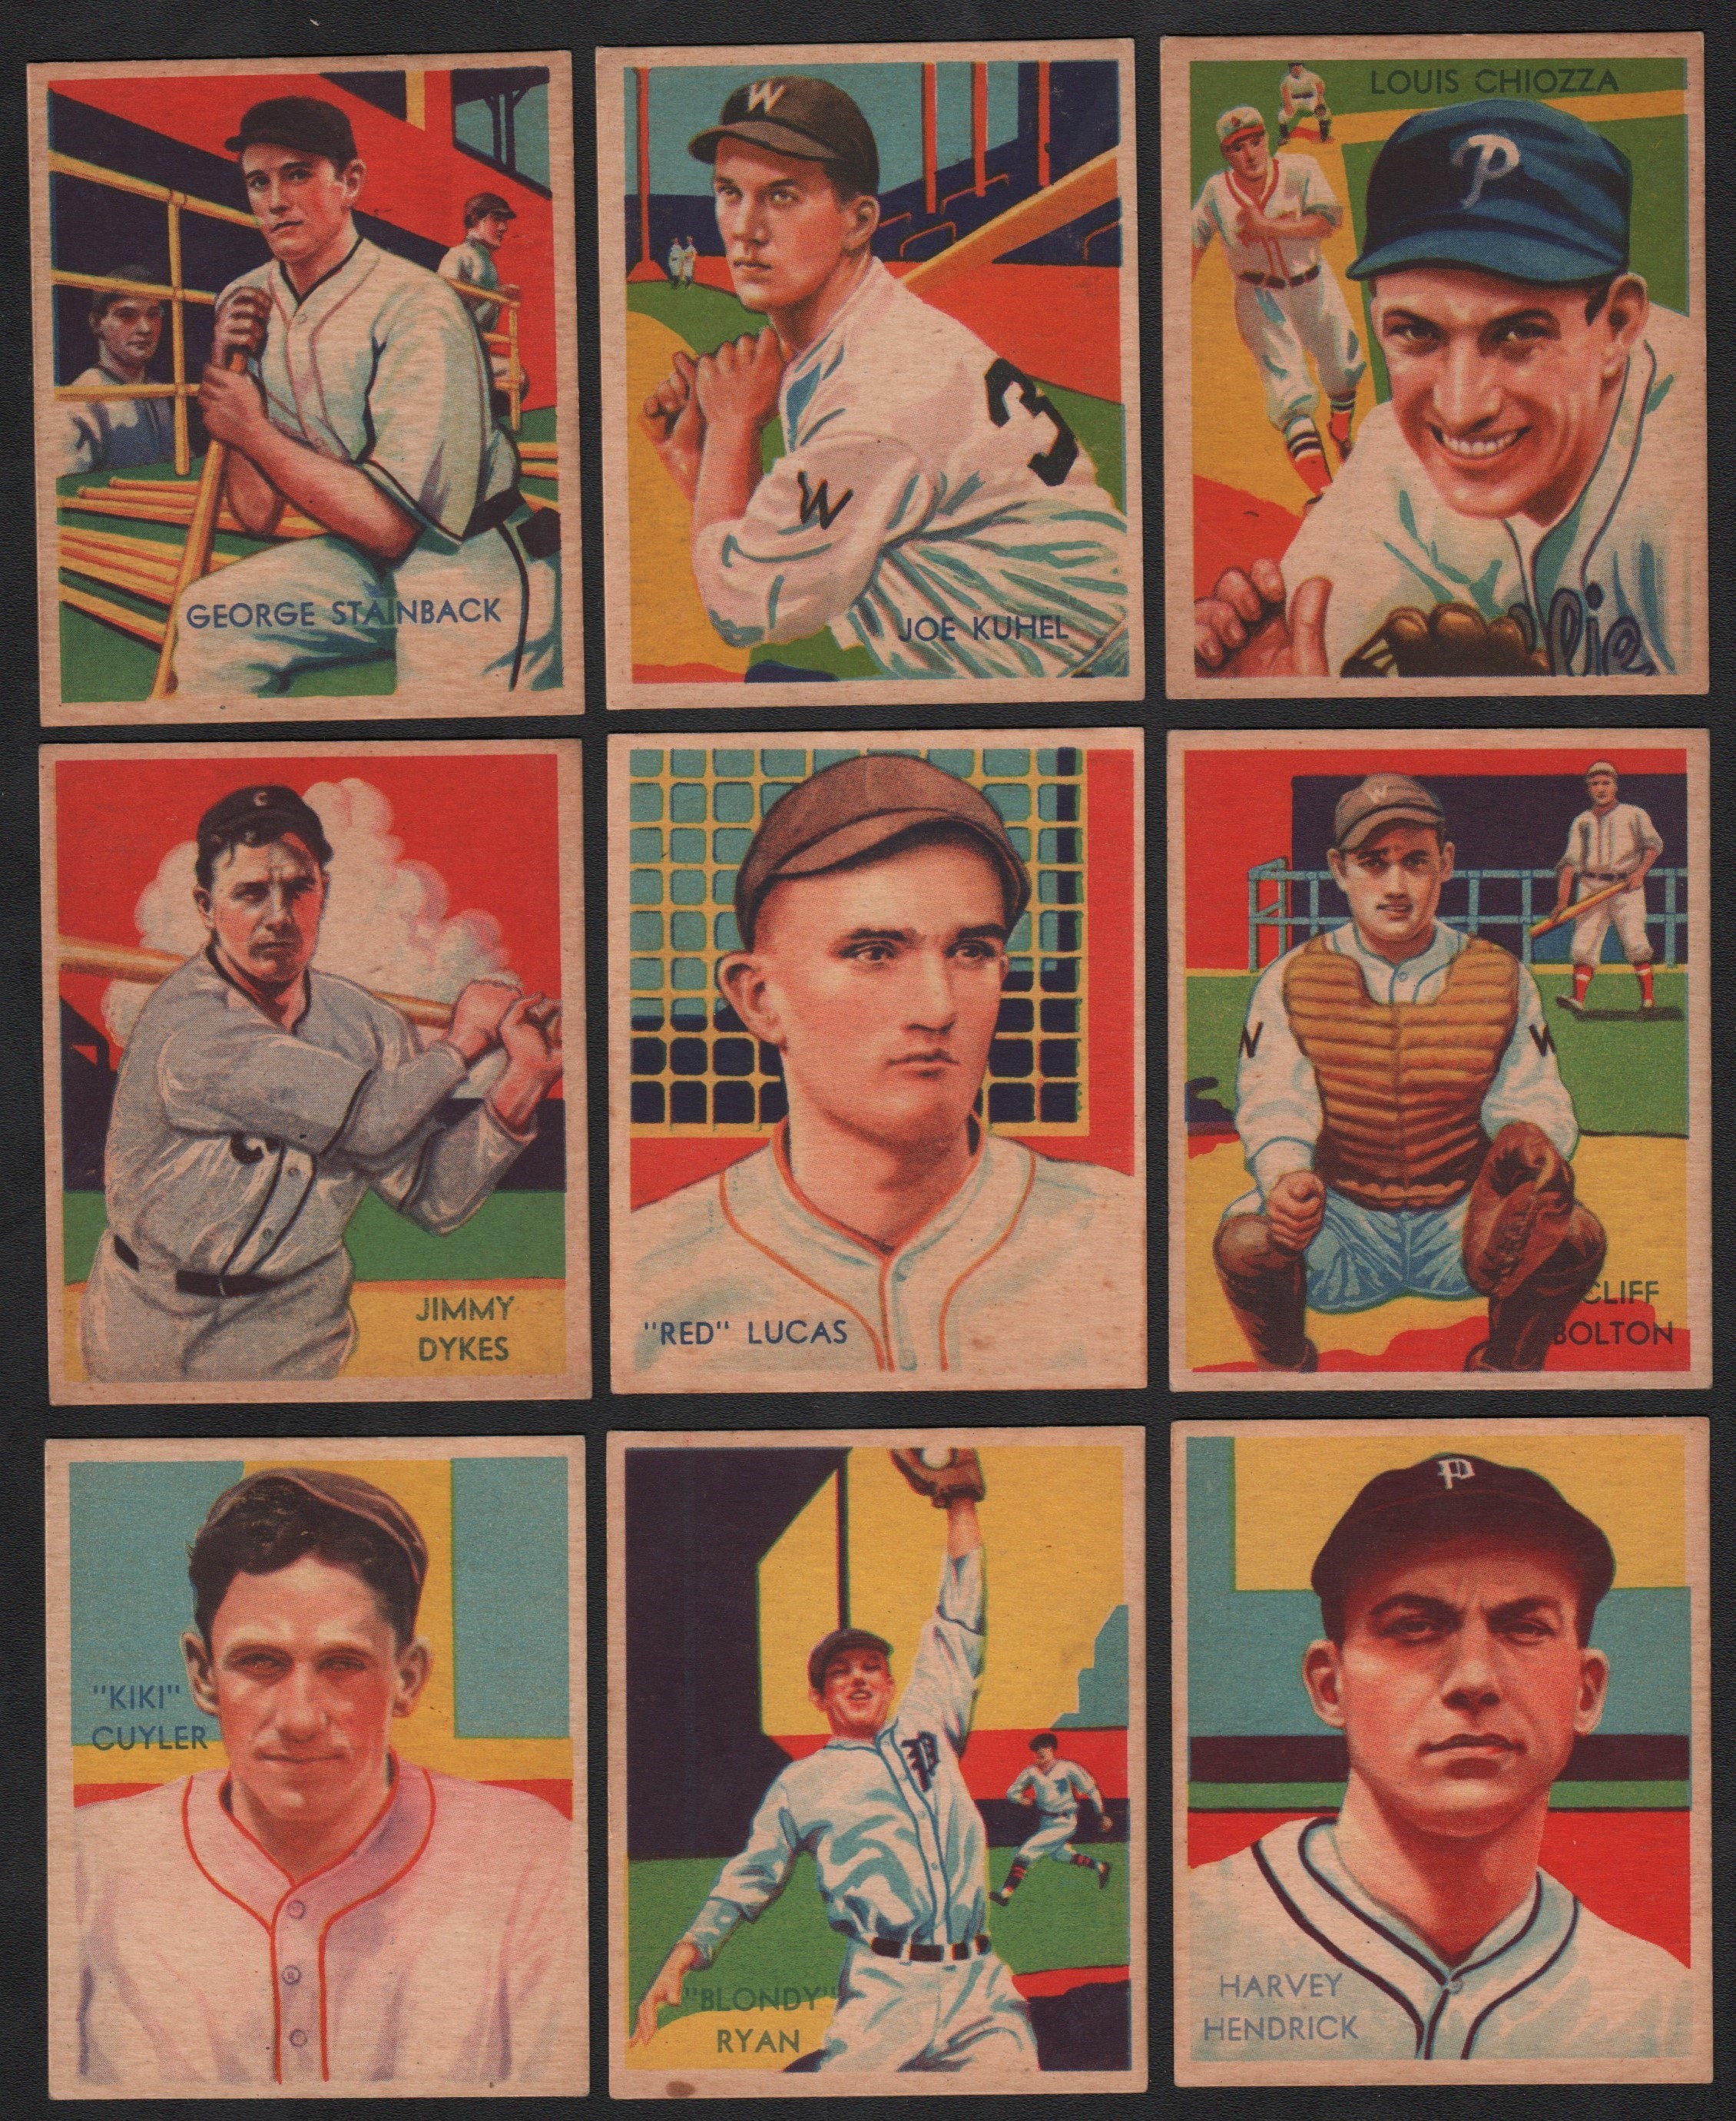 1934-35 Diamond Stars Collection of (13) Cards